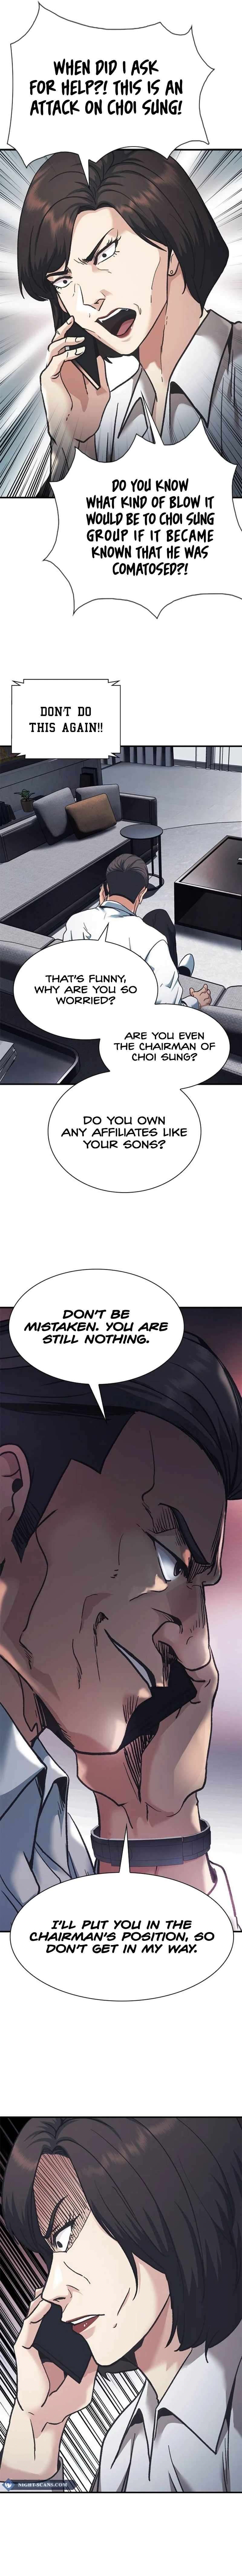 Chairman Kang: The Newcomer Chapter 38 page 18